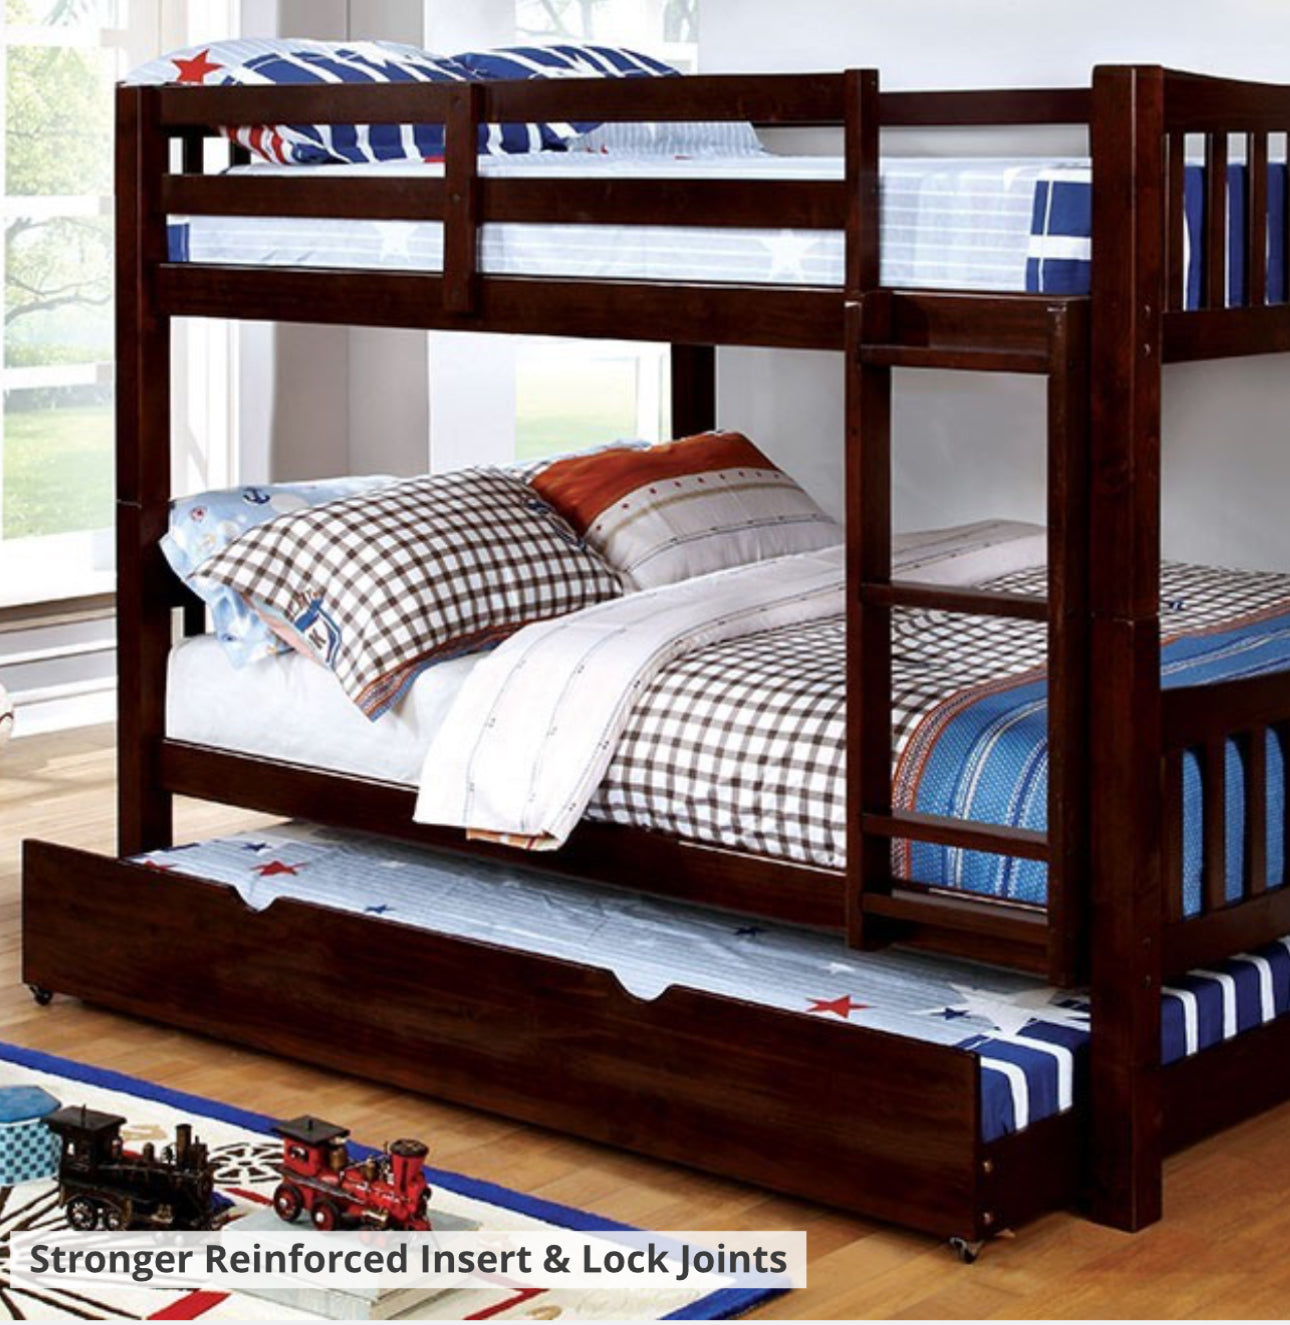 BUNK BEDS WITH TRUNDLE